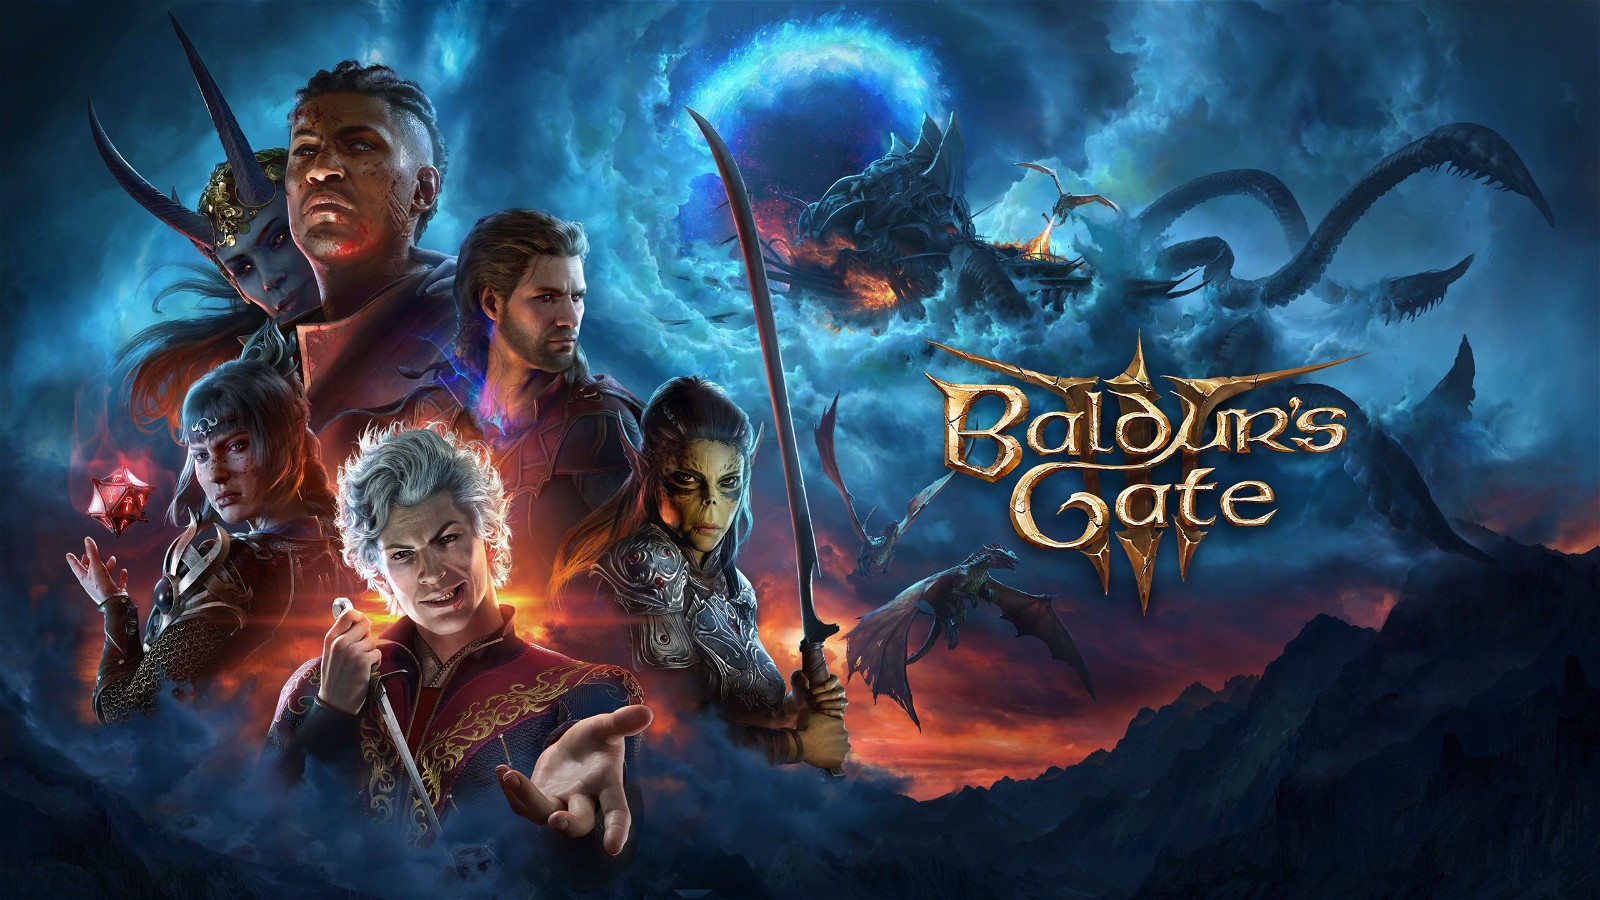 Baldur’s Gate 3 delivered on the anticipation and players are embarking on an epic journey through the Sword Coast. 